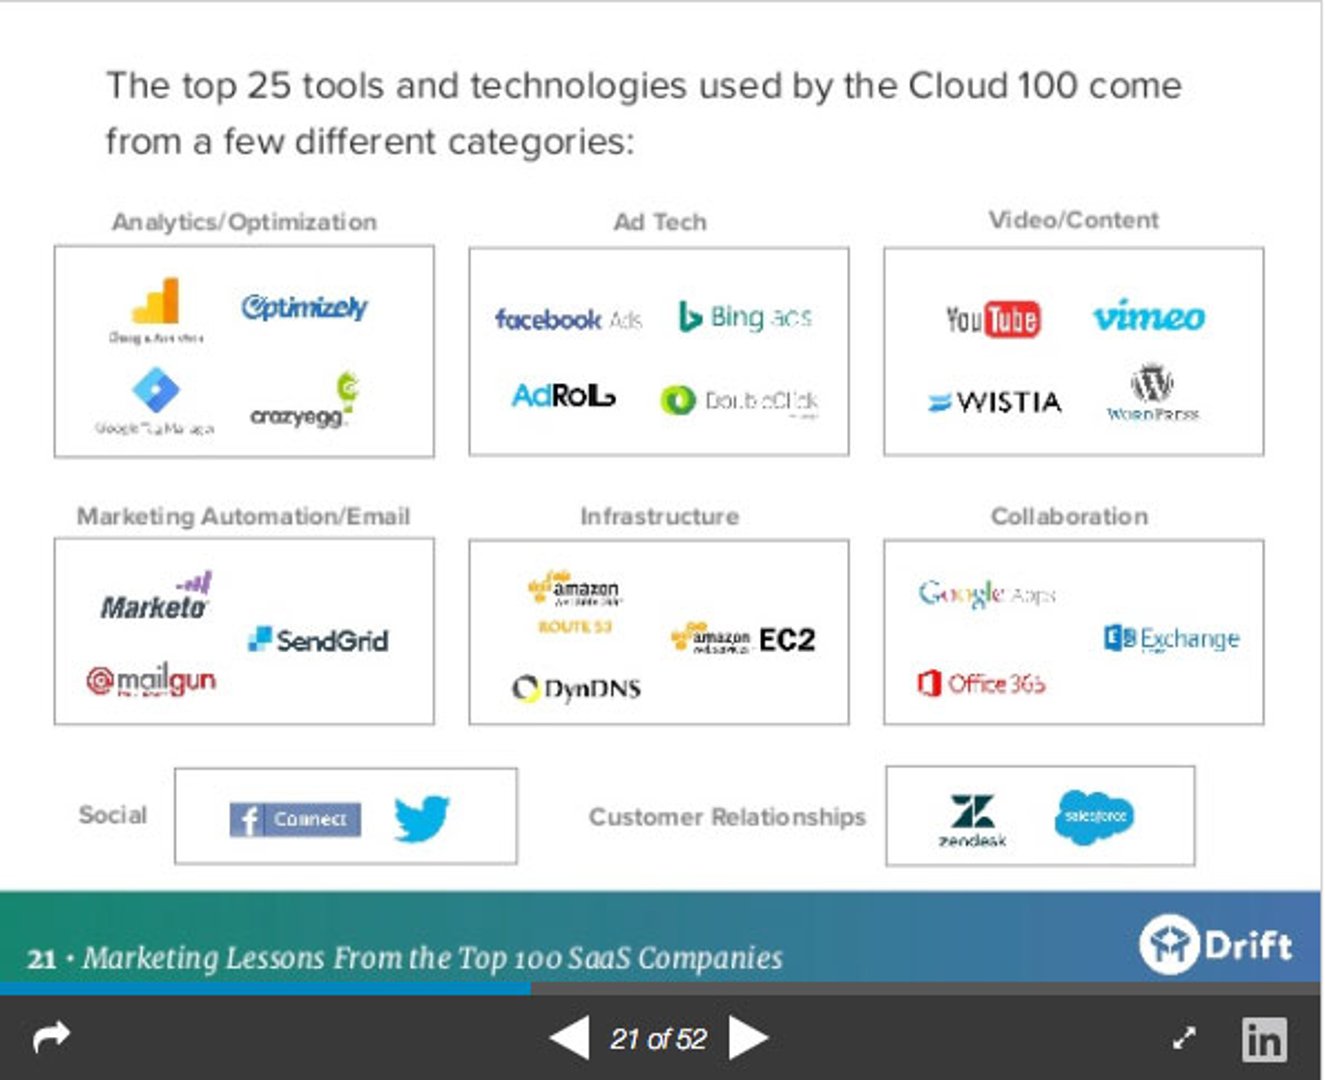 Top 25 Tools and Technologies Used by The Cloud 100 Come from A Few Different Categories